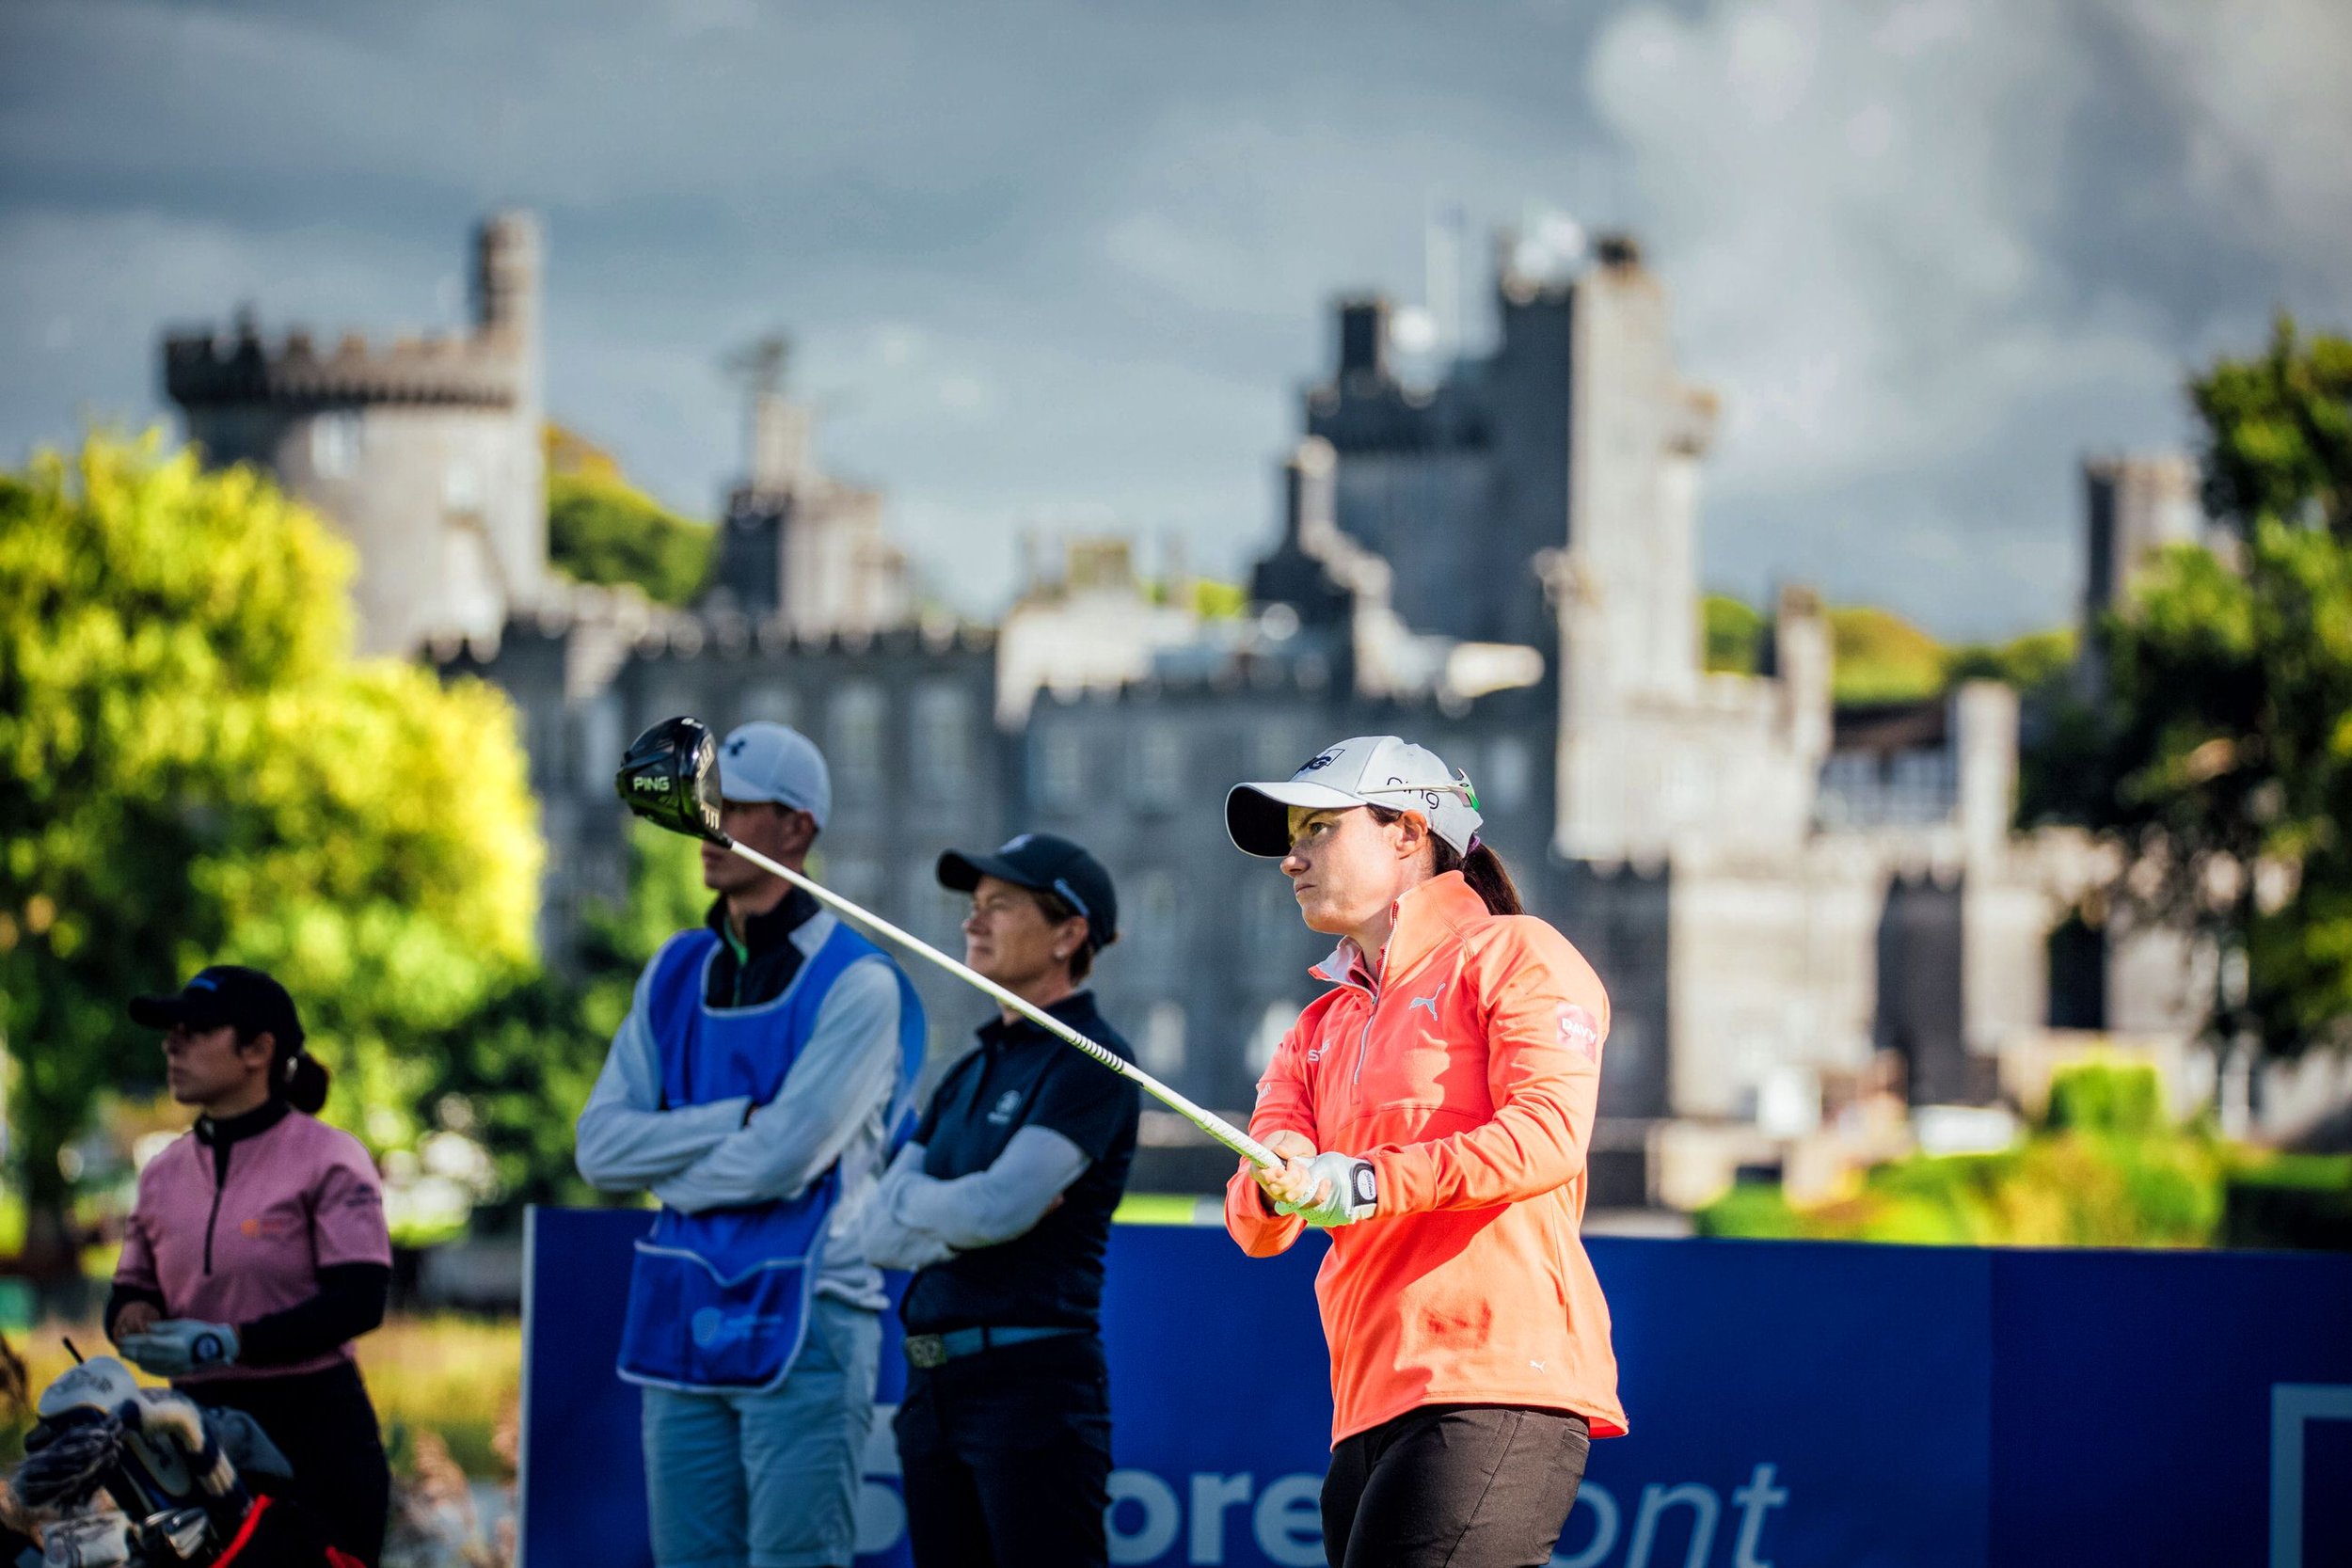  No Repro FeeLeona Maguire pictured playing the 11th hole on  her opening round of the KPMG Women's Irish Open in Dromoland Castle Golf Club, Newmarket On Fergus, Clare today.Pic. Brian Arthur 